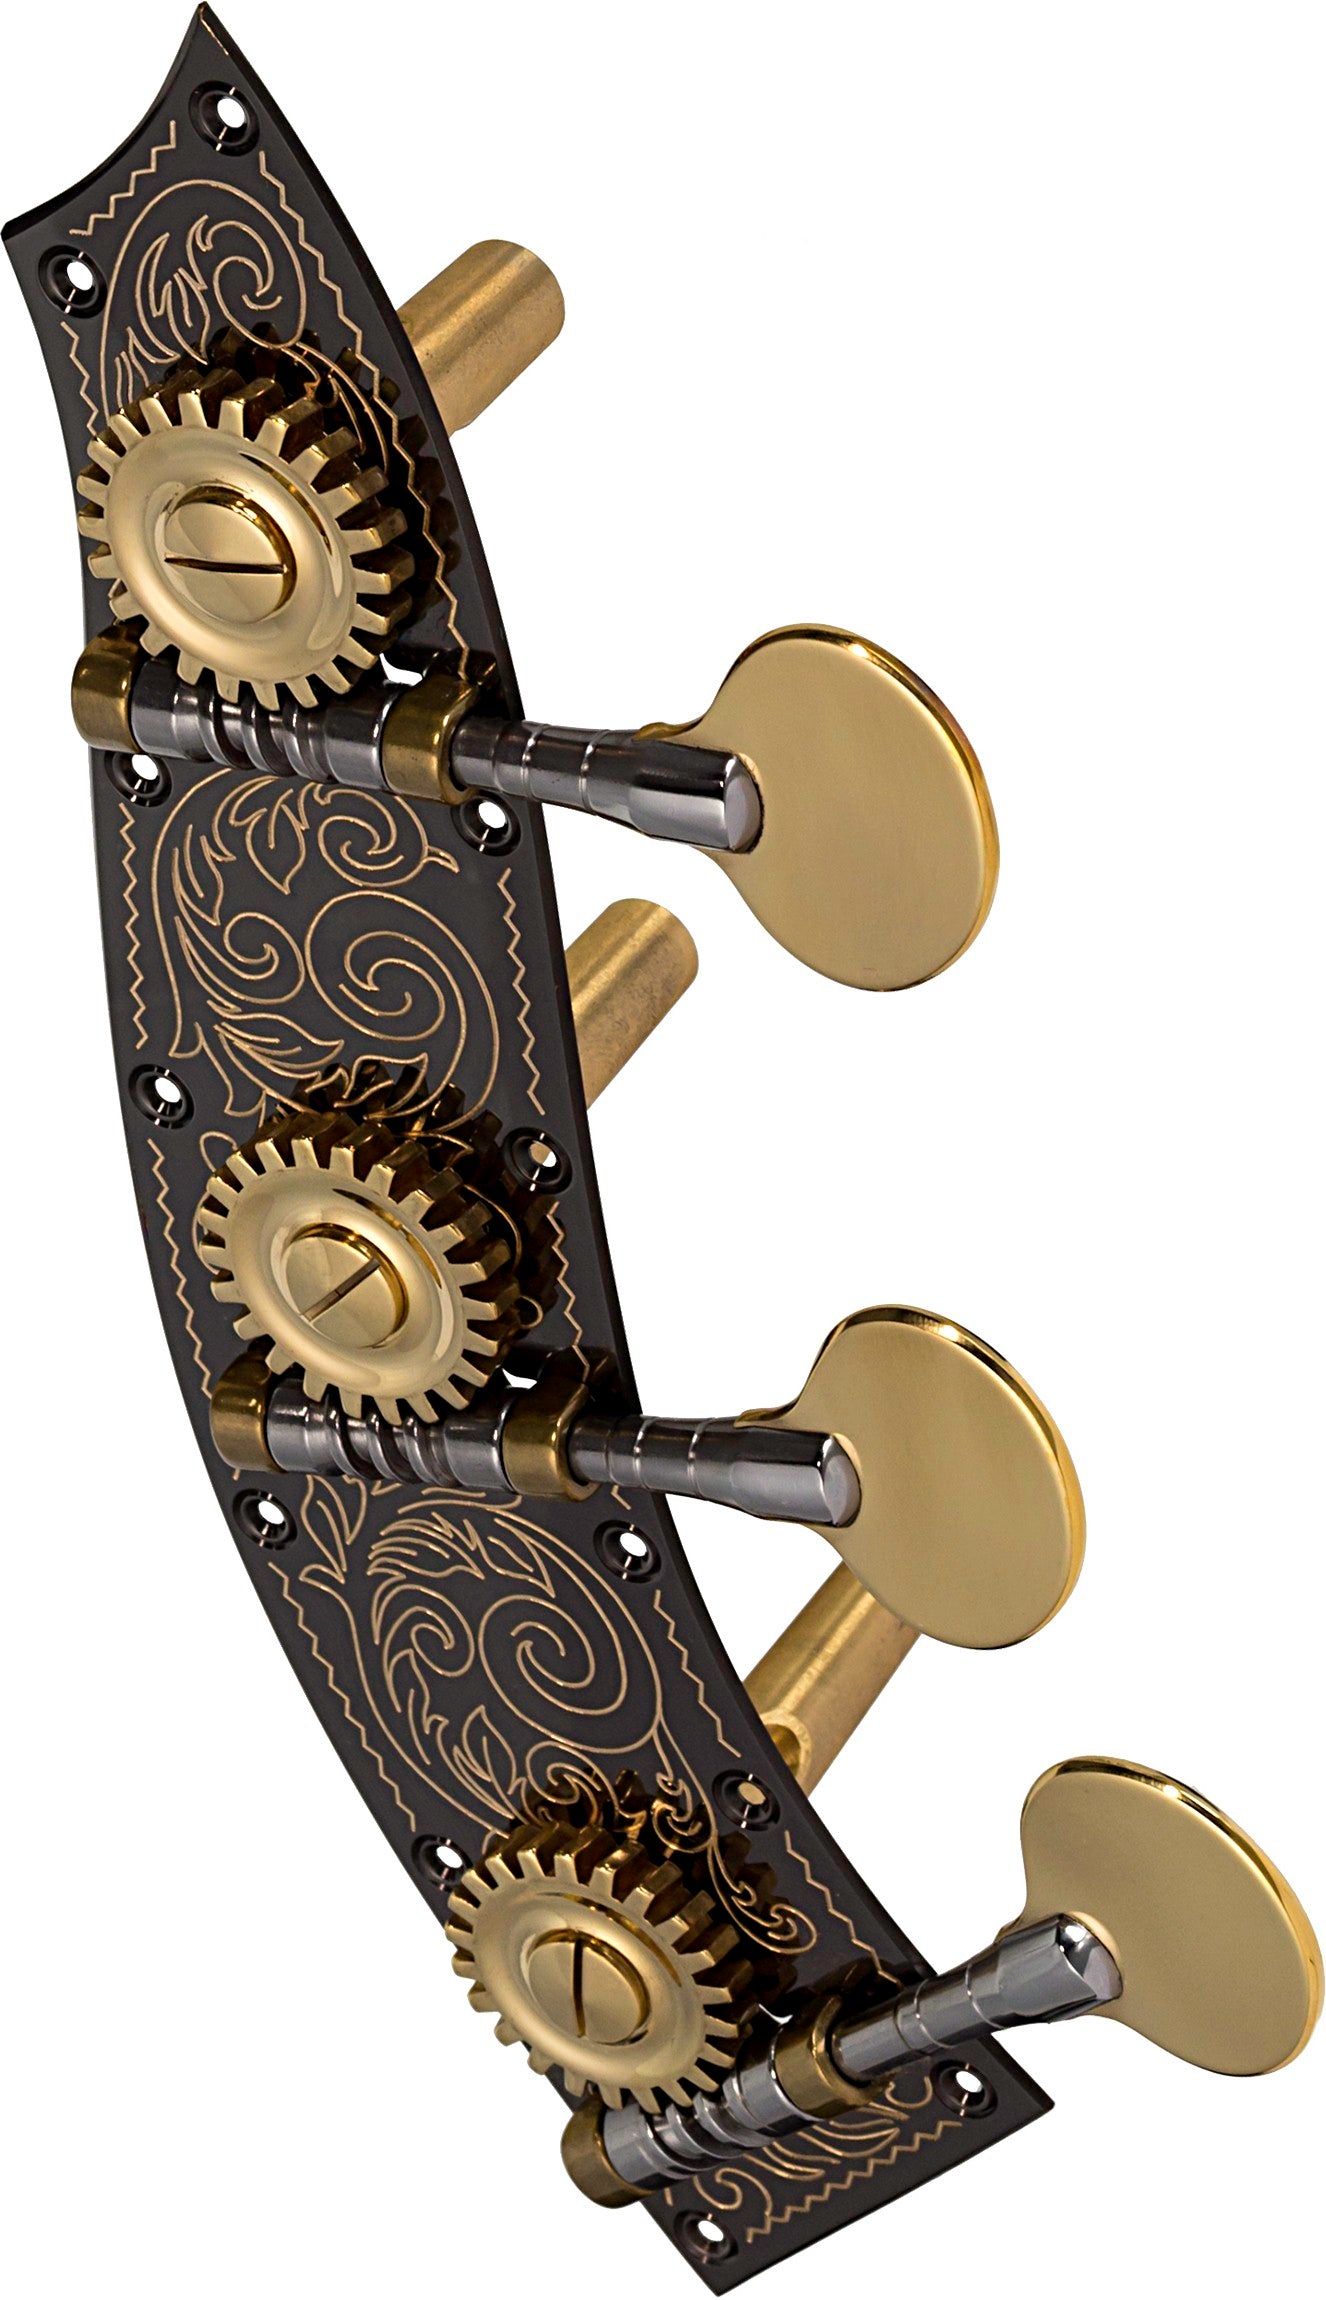 Bass Tuning Machines With Tyrolean Design - 5 String Model